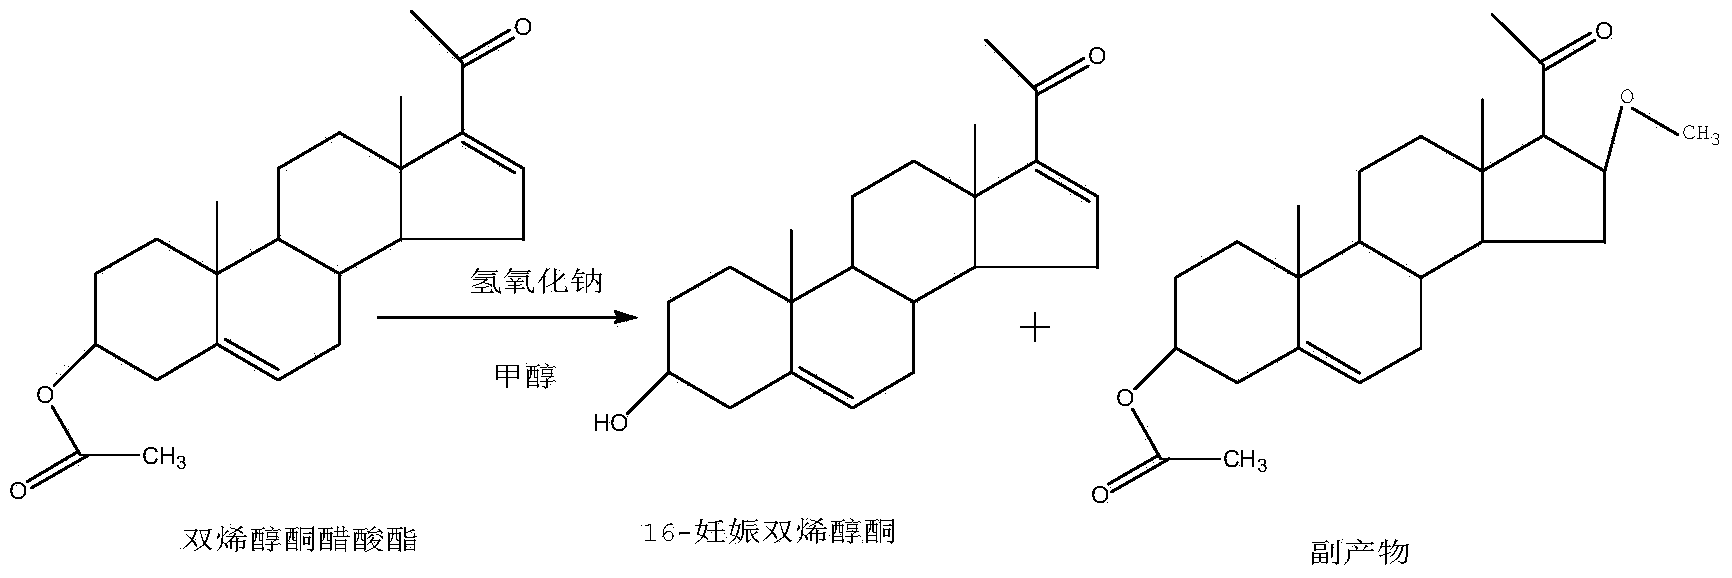 Method for synthesizing 16-dehydropregnenolone by taking dehydropregnenolone acetate as raw material